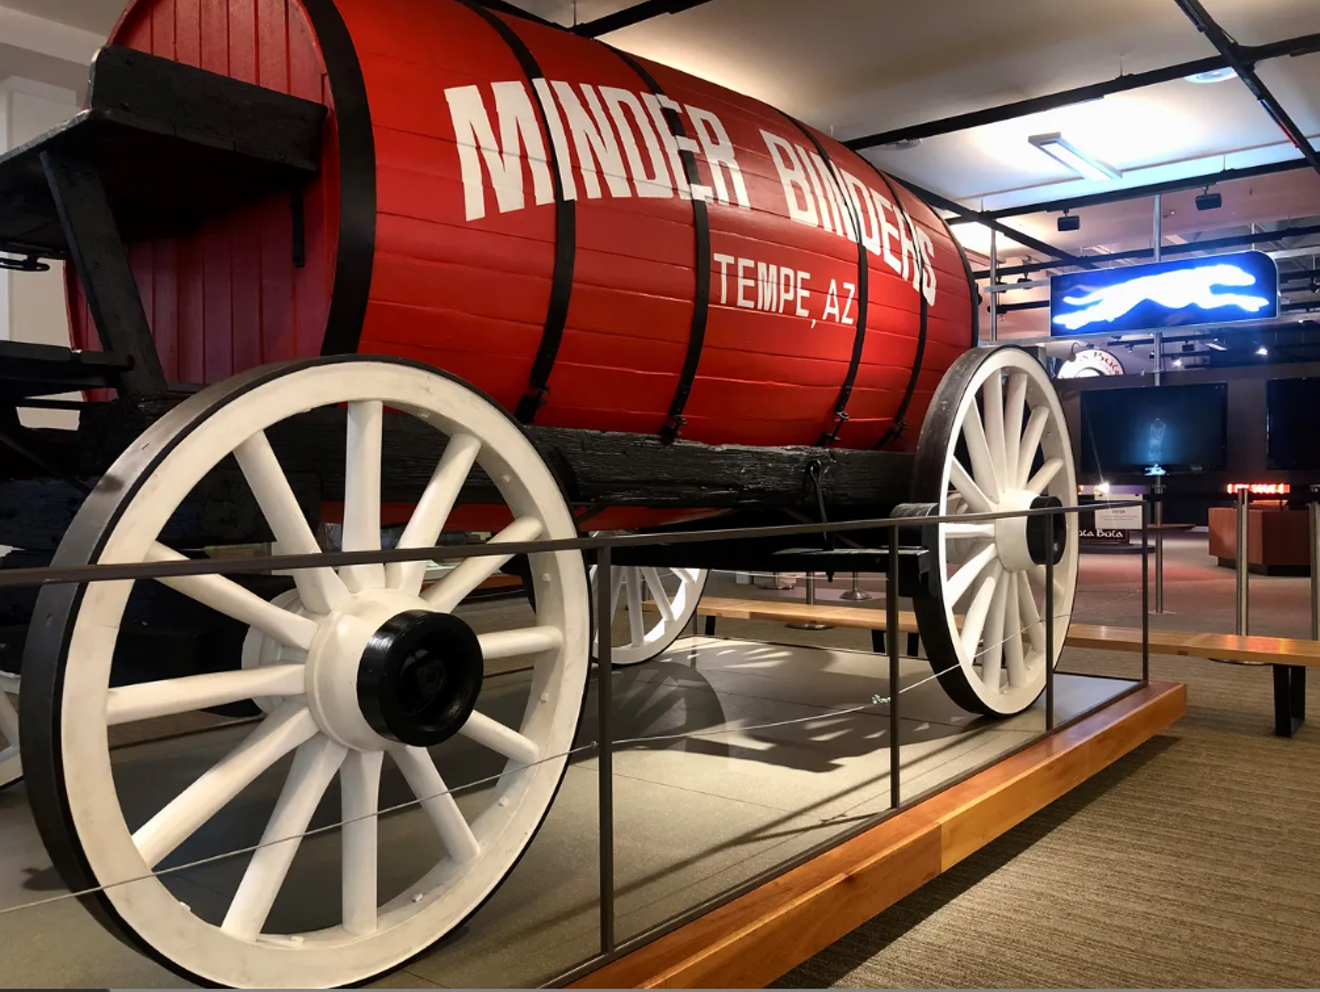 The old Minder Binder wagon is part of the "Tempe Signs" exhibit.